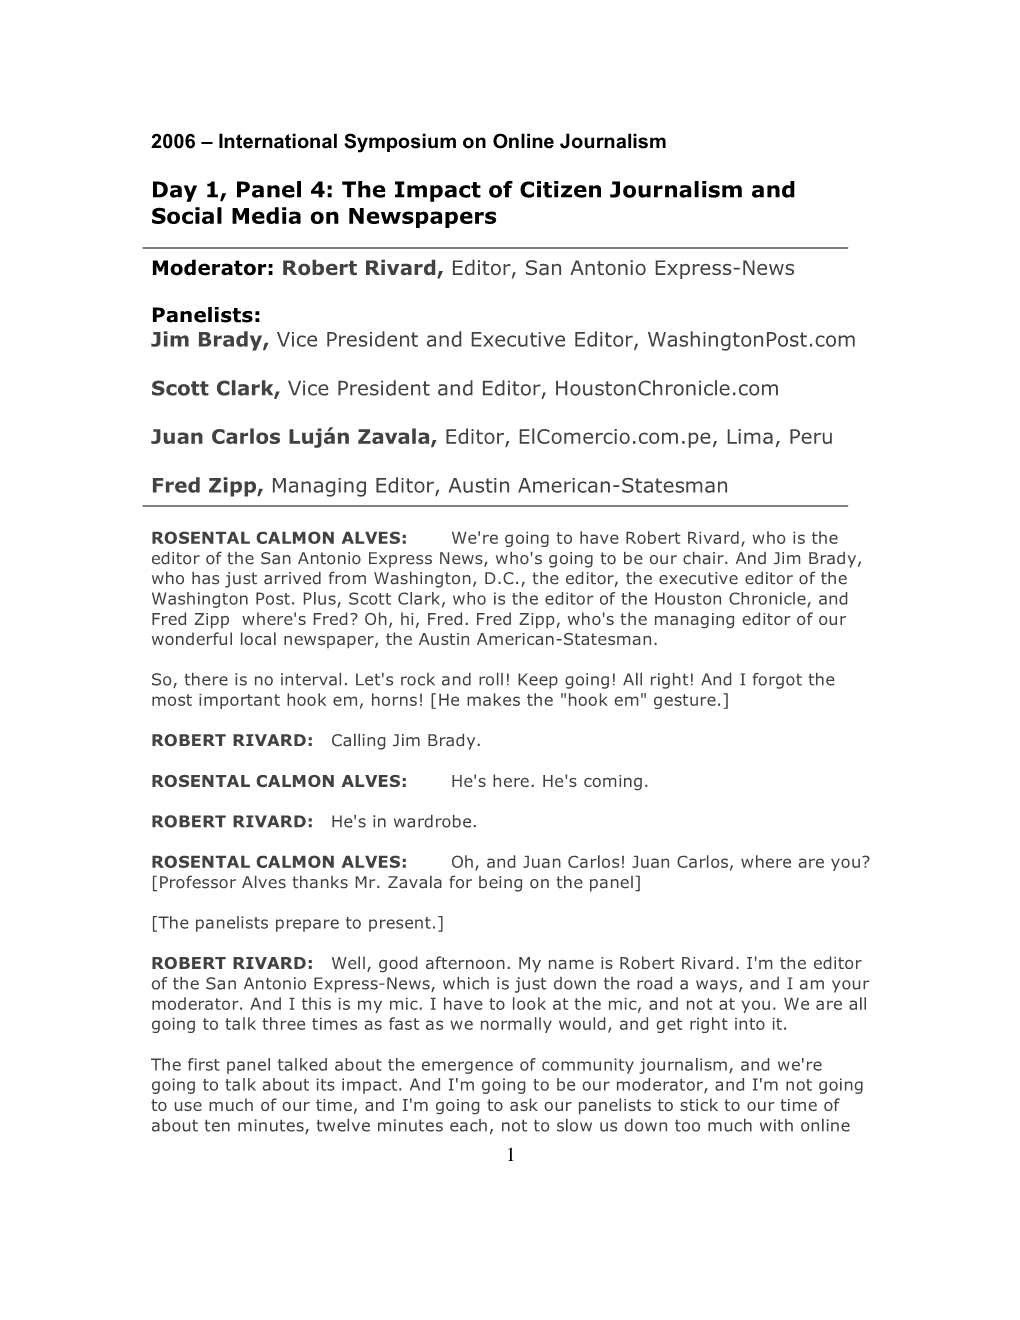 The Impact of Citizen Journalism and Social Media on Newspapers